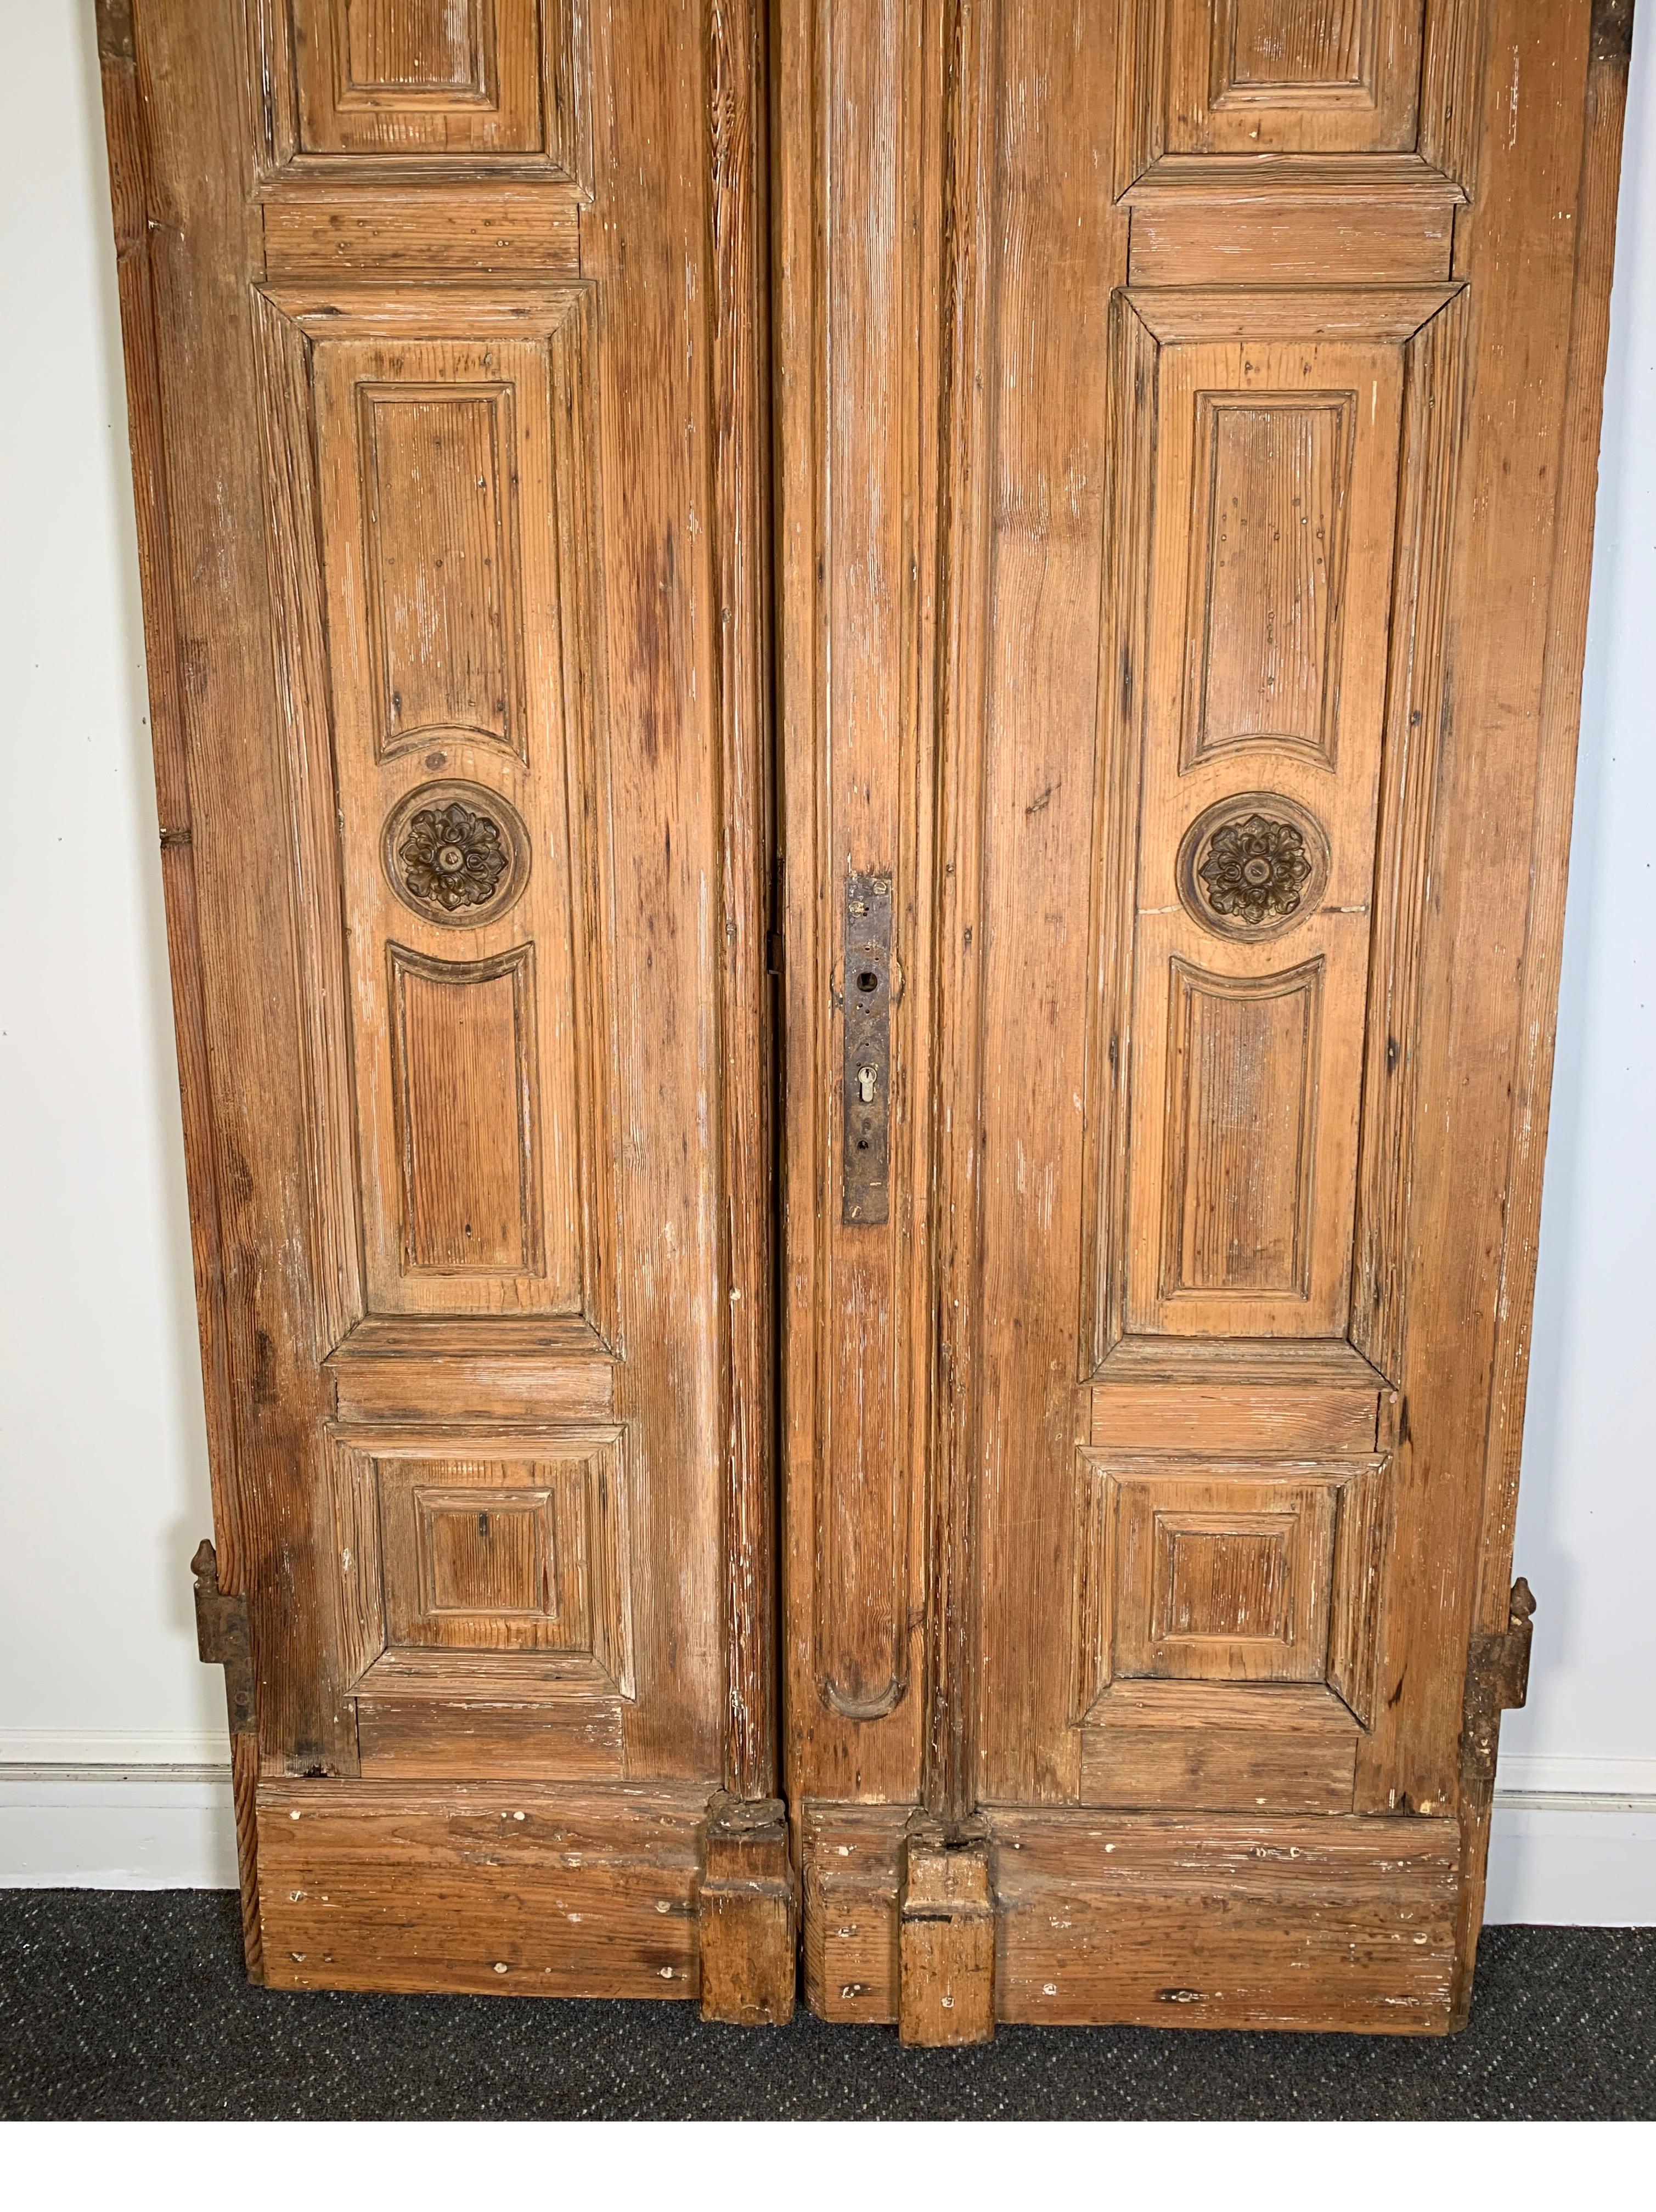 A remarkable pair of 19th century handmade solid pine doors, England, 1860-1880. These beautiful doors at 92.5 inches tall, 49.5 inches wide with exceptional workmanship with a natural scrubbed finish. Notice the zinc capital detail at the top,